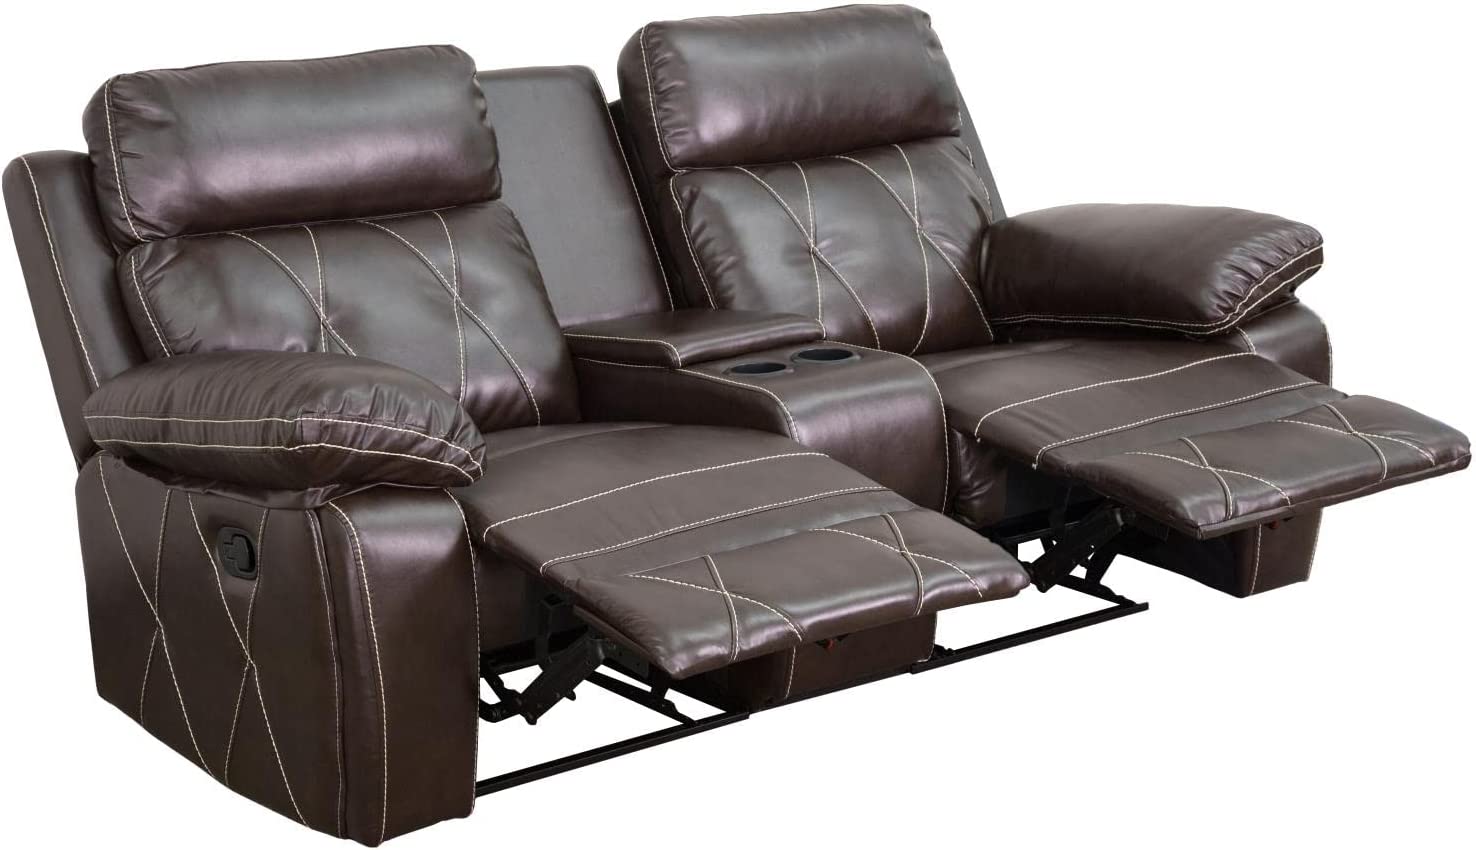 Flash Furniture Reel Comfort Series 2-Seat Reclining Brown LeatherSoft Theater Seating Unit with Straight Cup Holders